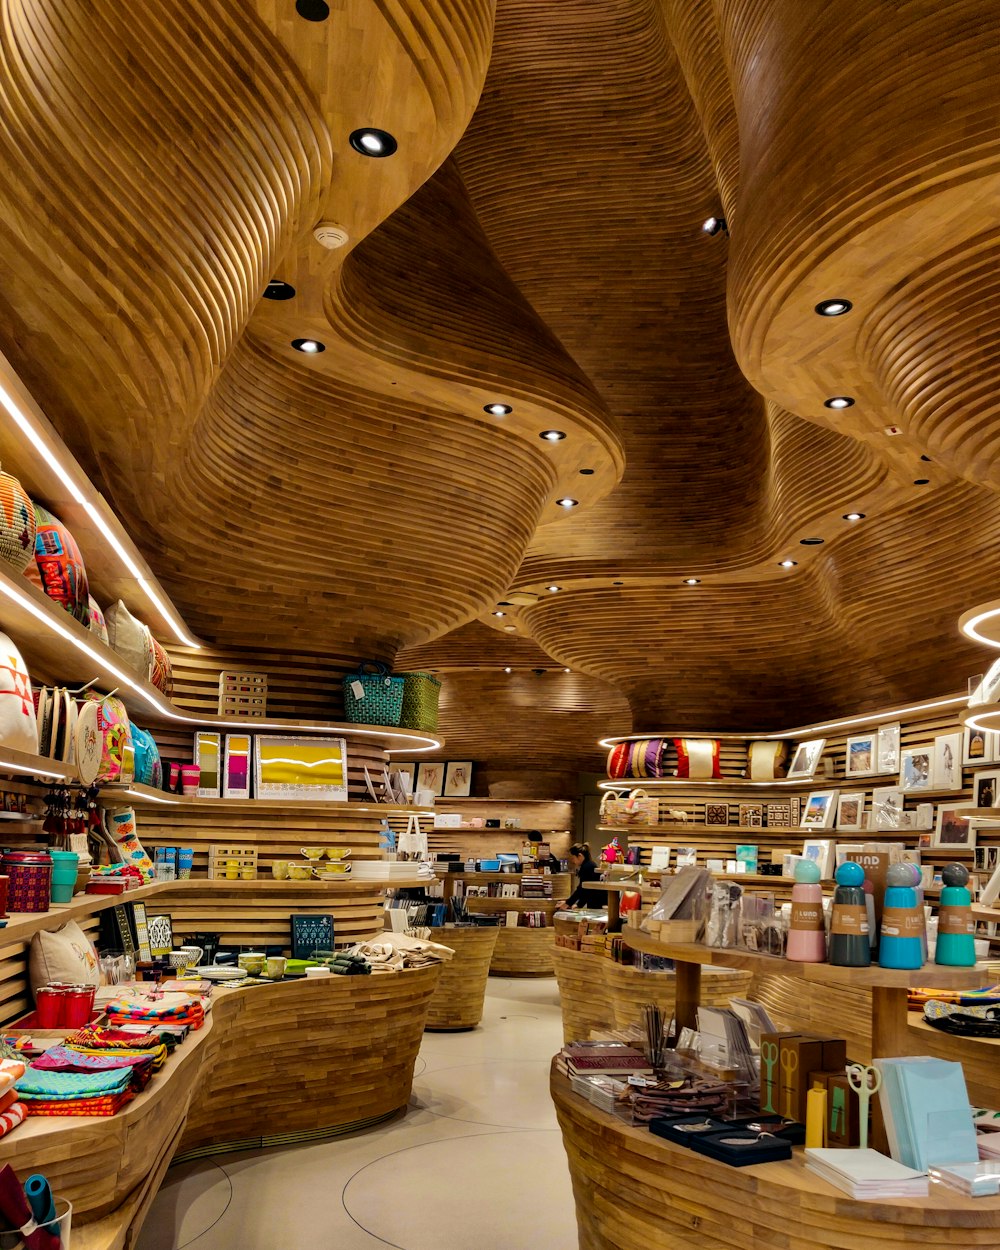 wavy ceiling with shelves under